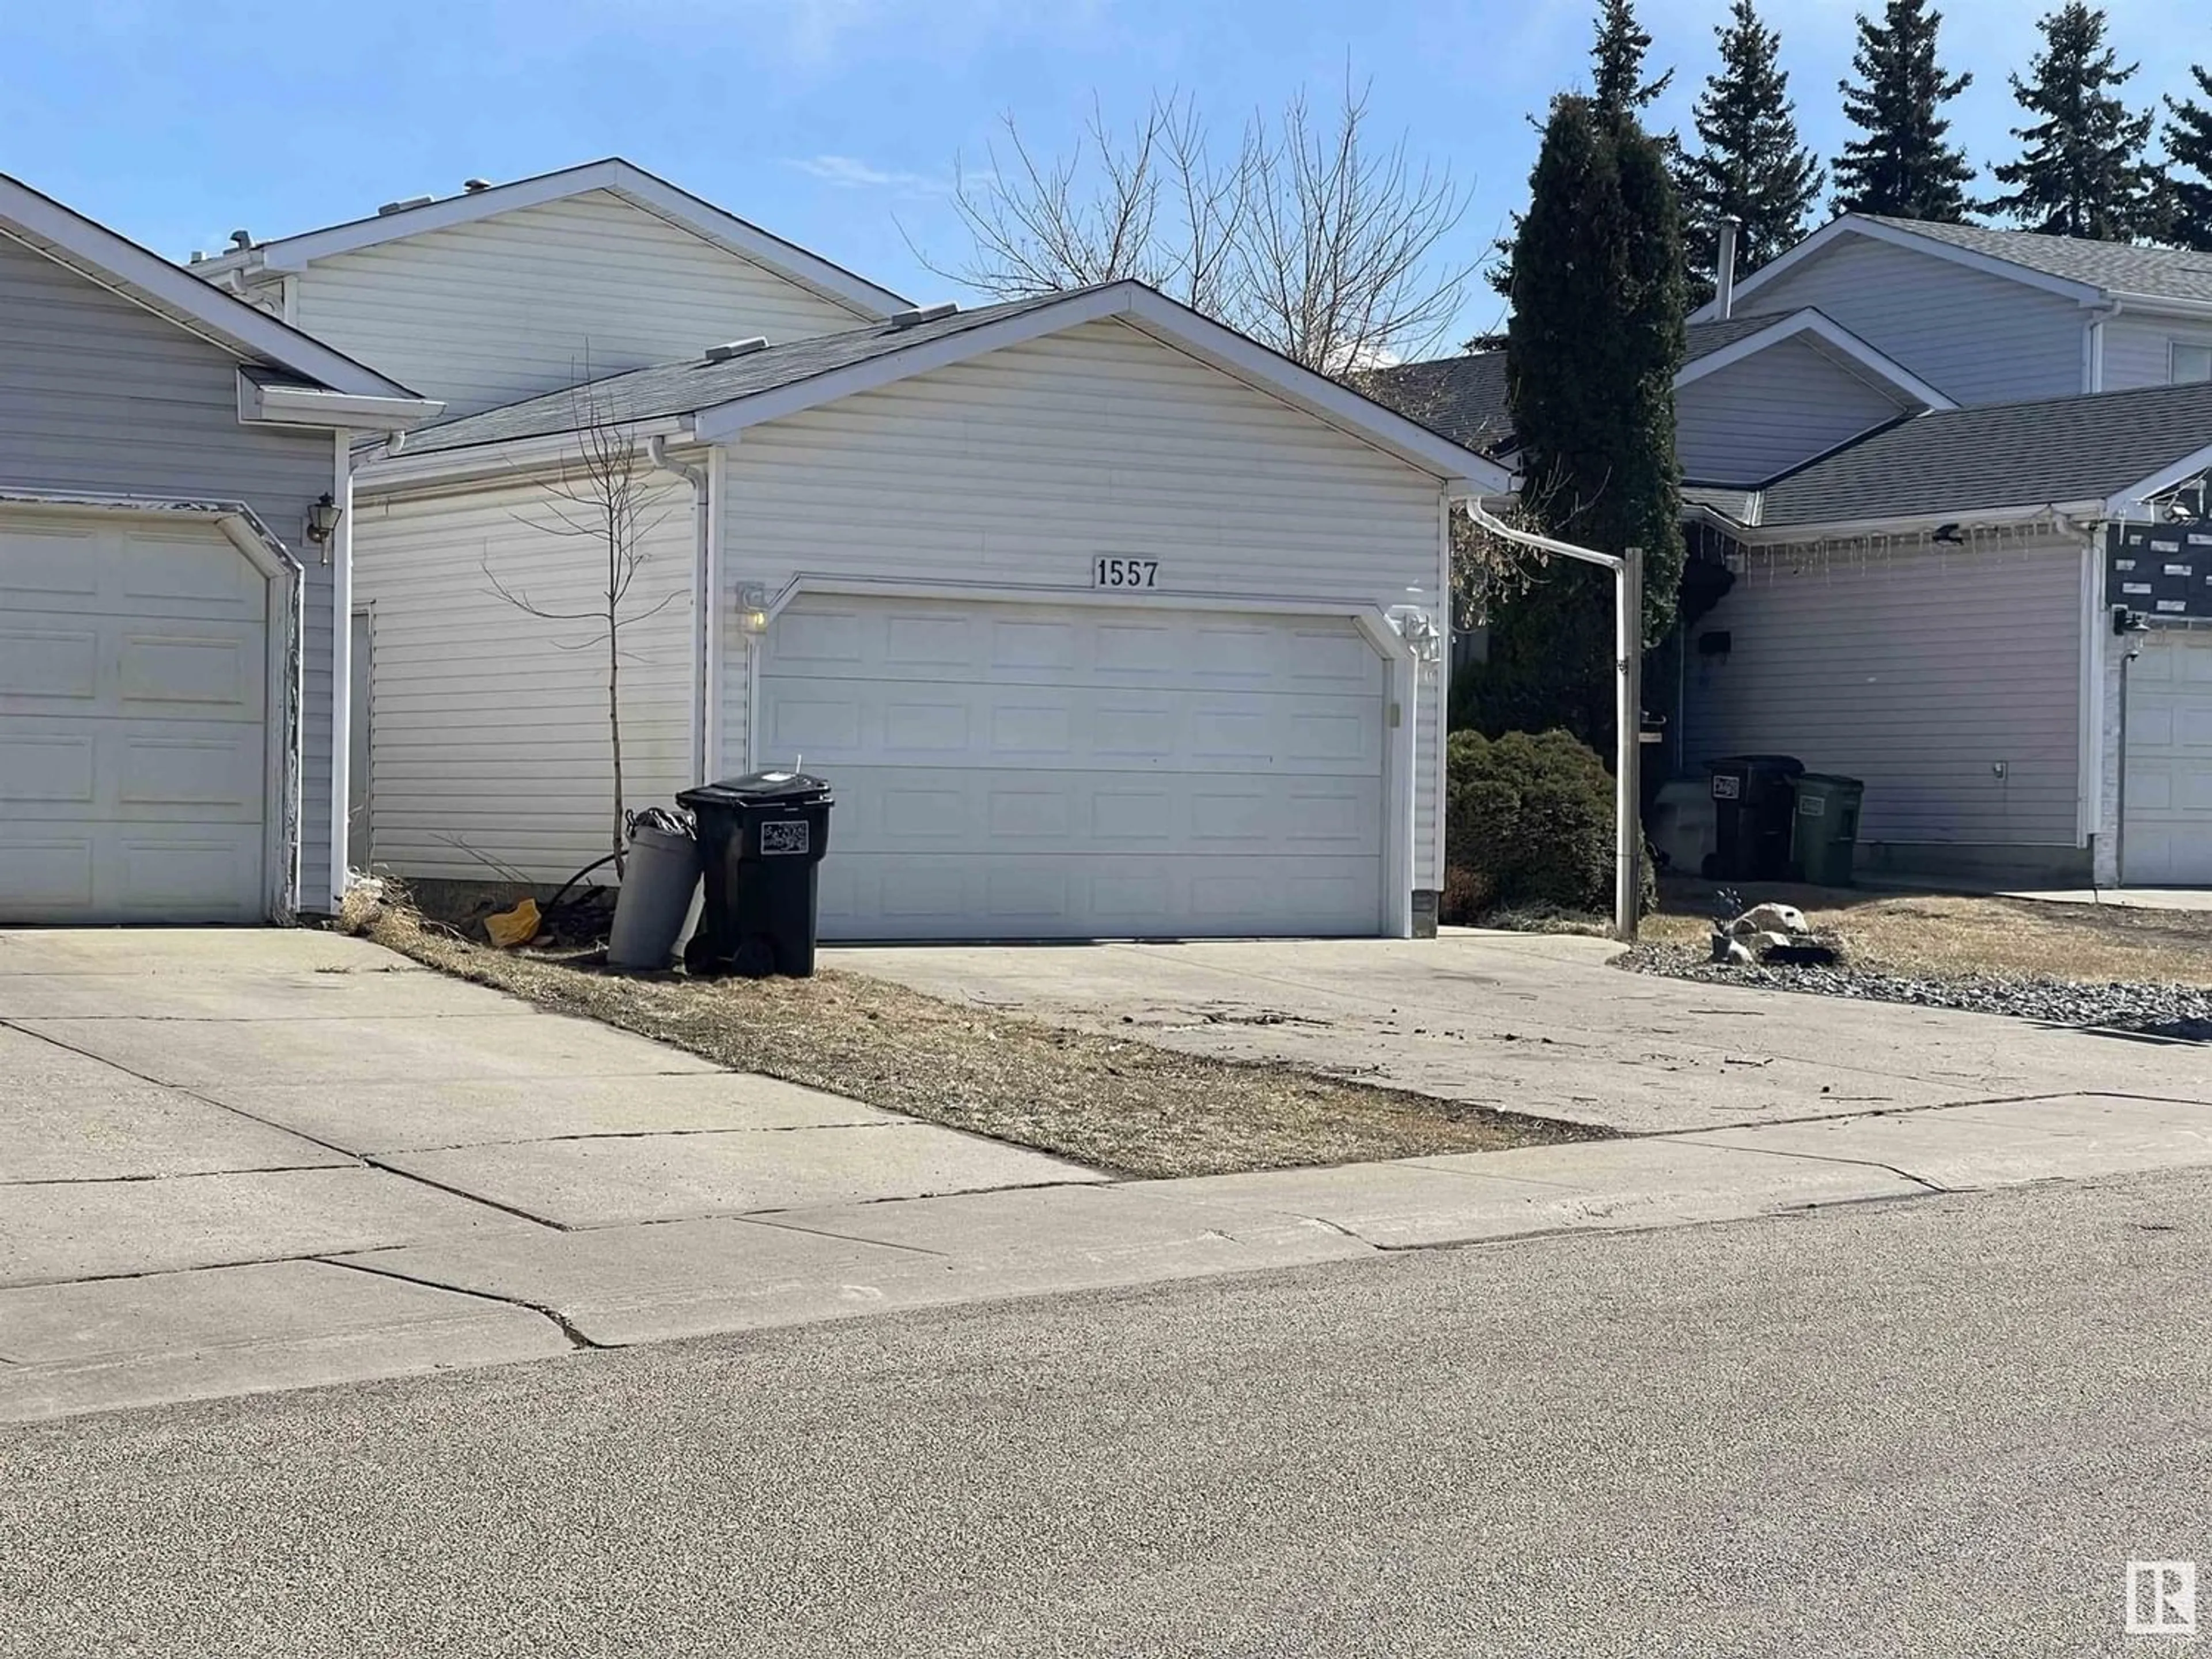 Frontside or backside of a home for 1557 49A ST NW, Edmonton Alberta T6L6Y6